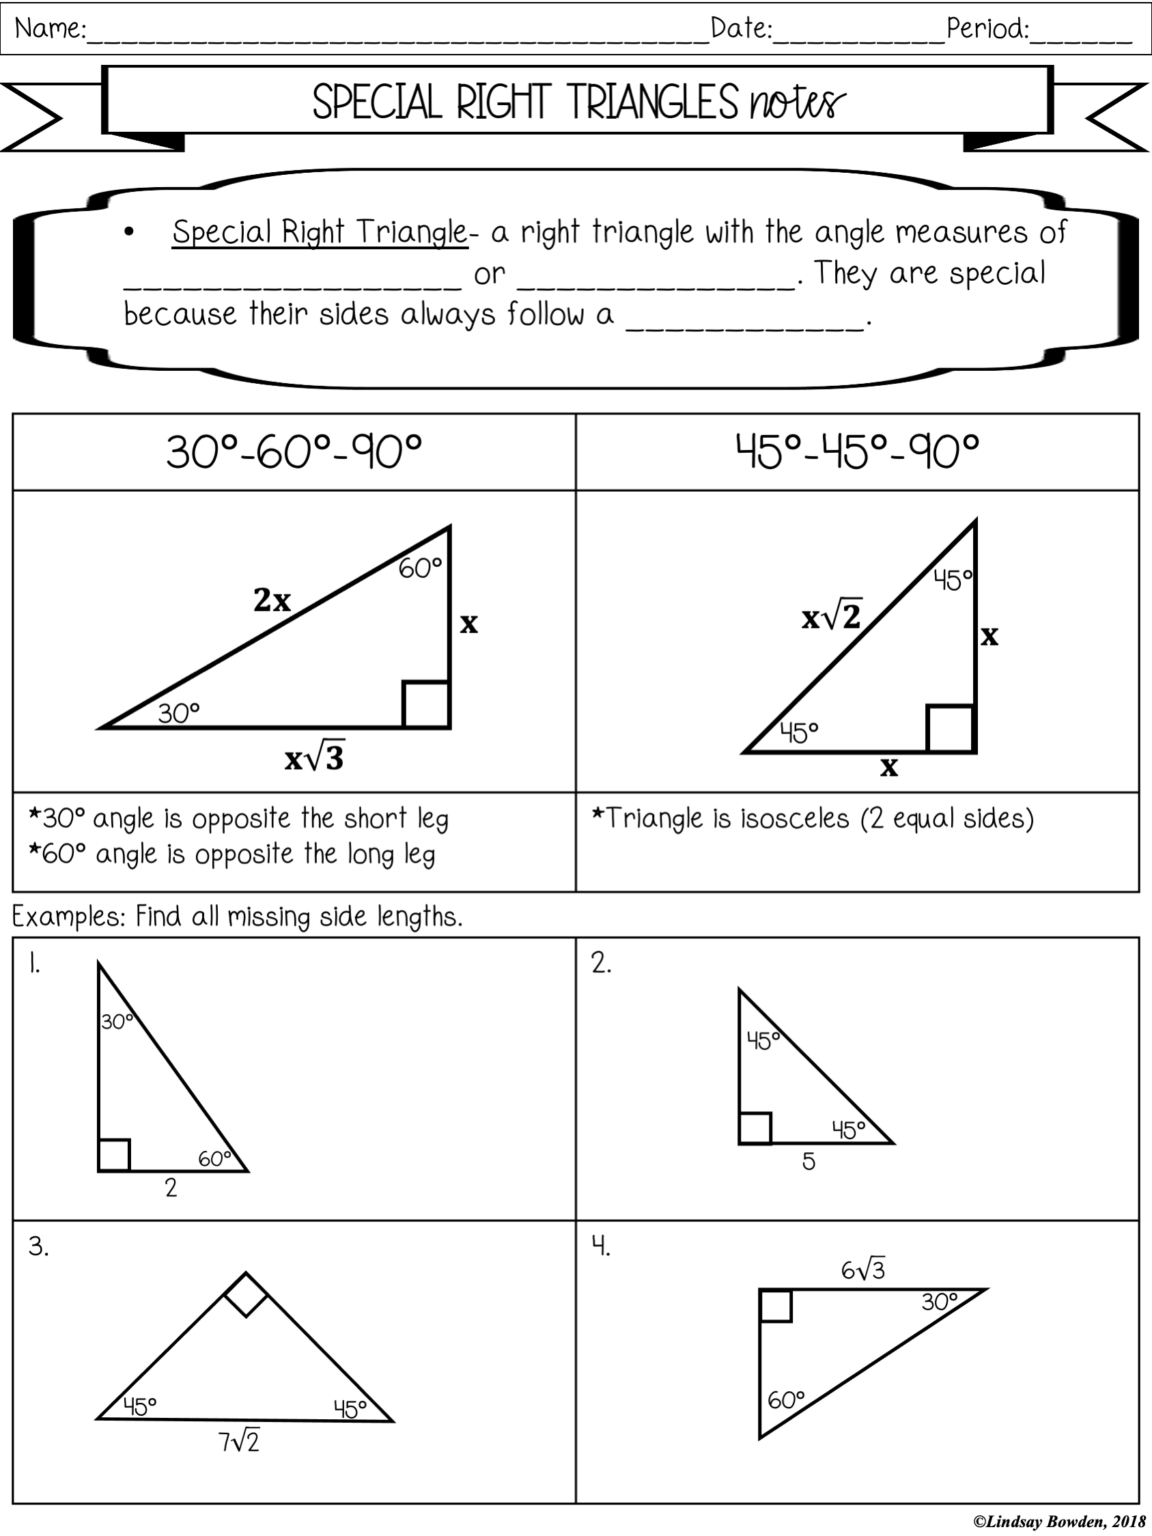 Special Right Triangles Notes And Worksheets Lindsay Bowden 3644